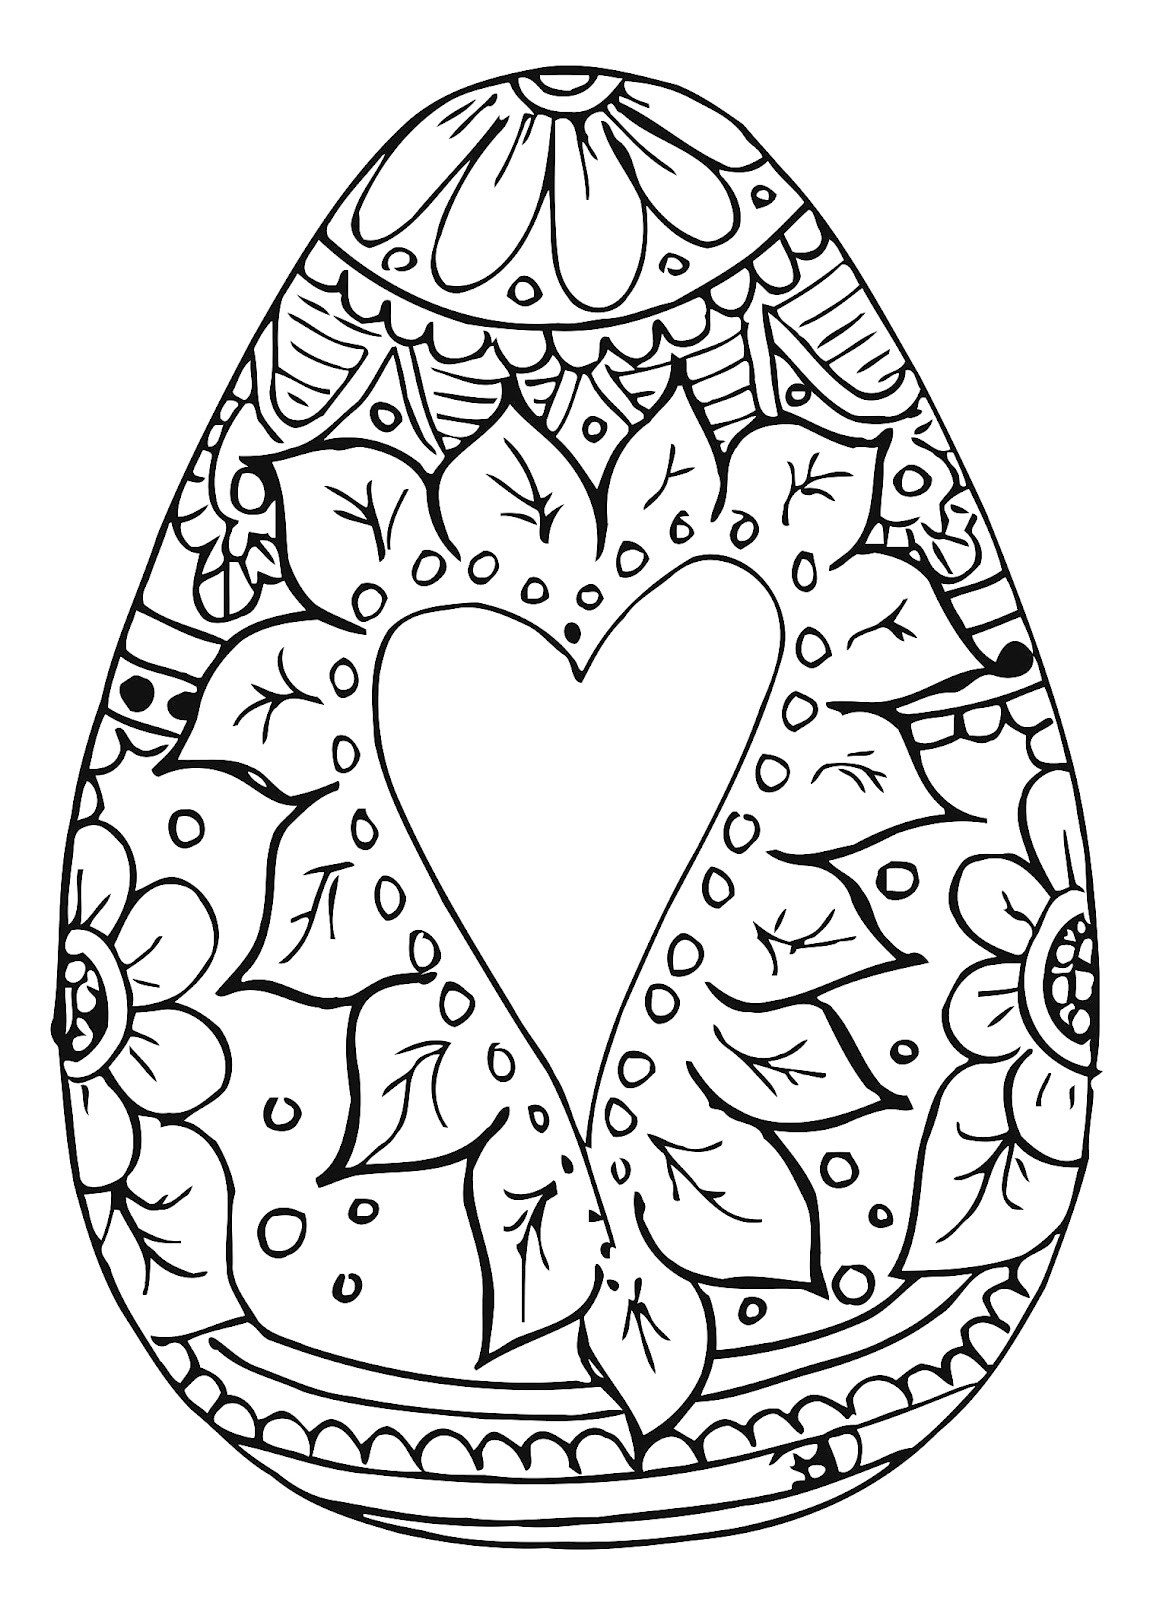 Coloring Pages For Adults Easter 20 Best Ideas Easter Coloring Books Home Inspiration And Diy